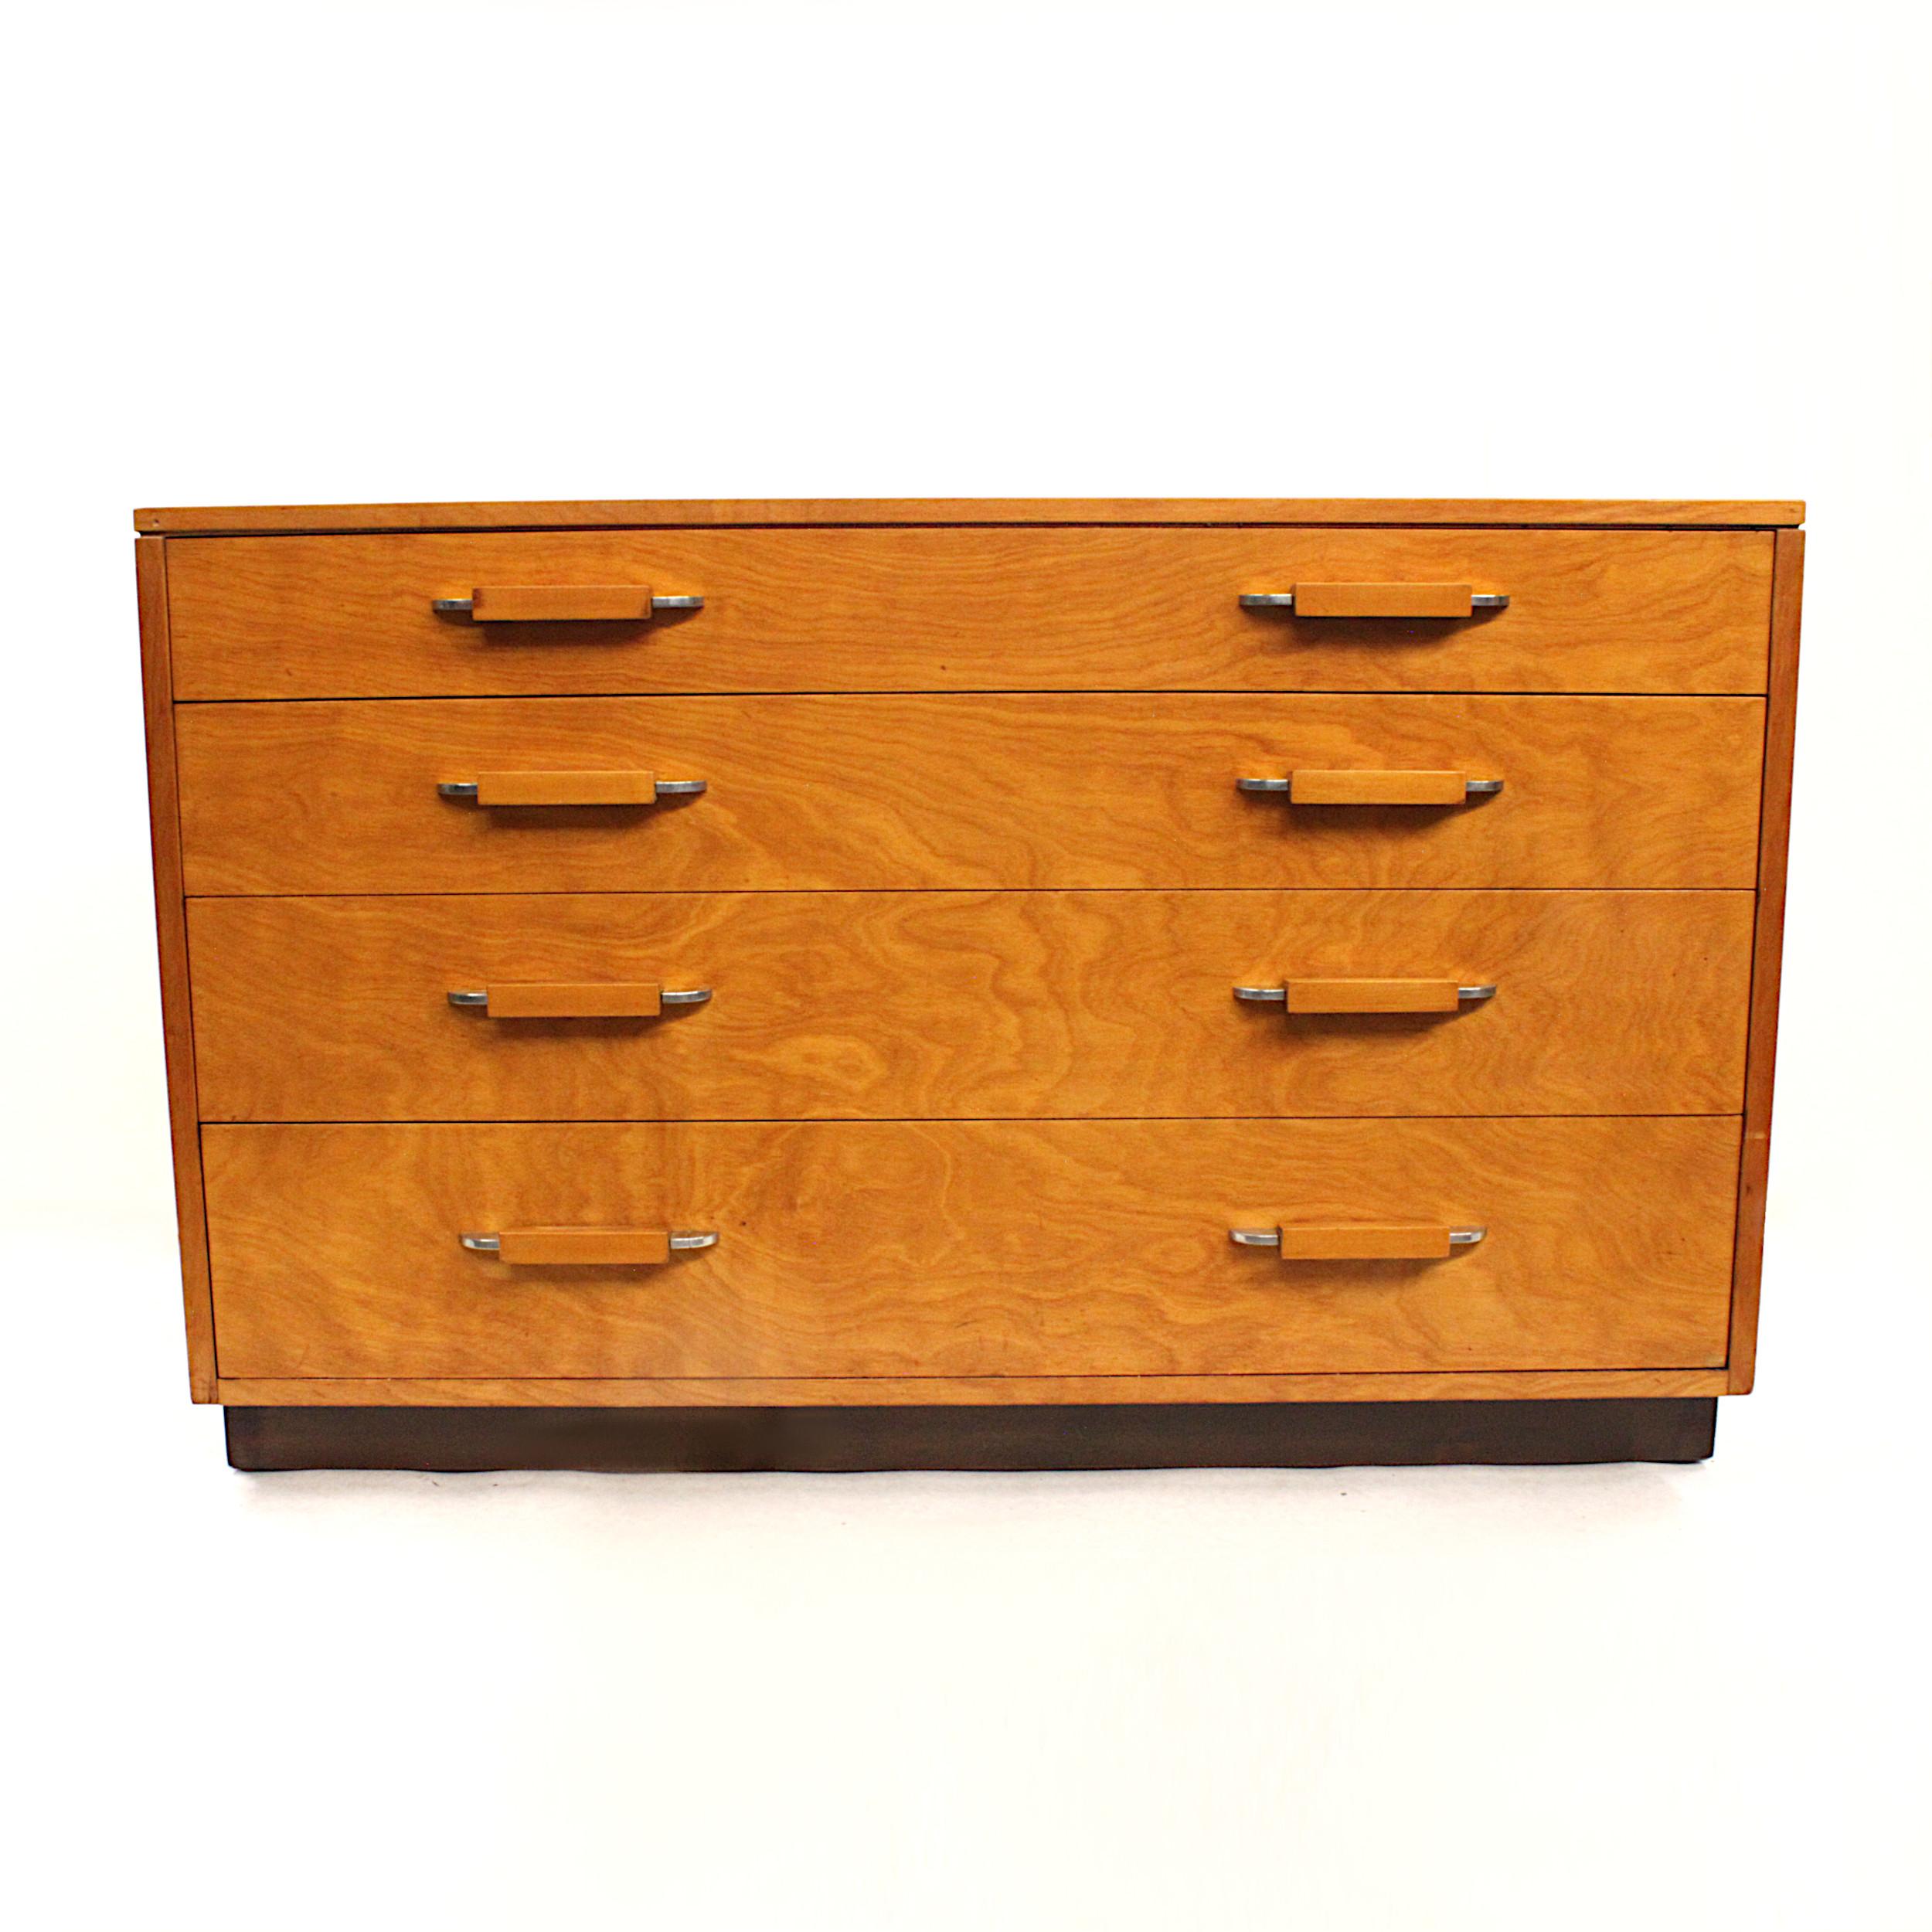 This is a fantastic Mid-Century Modern dresser by architect/designer Eliel Saarinen, father of architect/designer Eero Saarinen. Dresser features matched-grain Birch veneer, unique Birch/polished-aluminum hardware, and an off-set top that